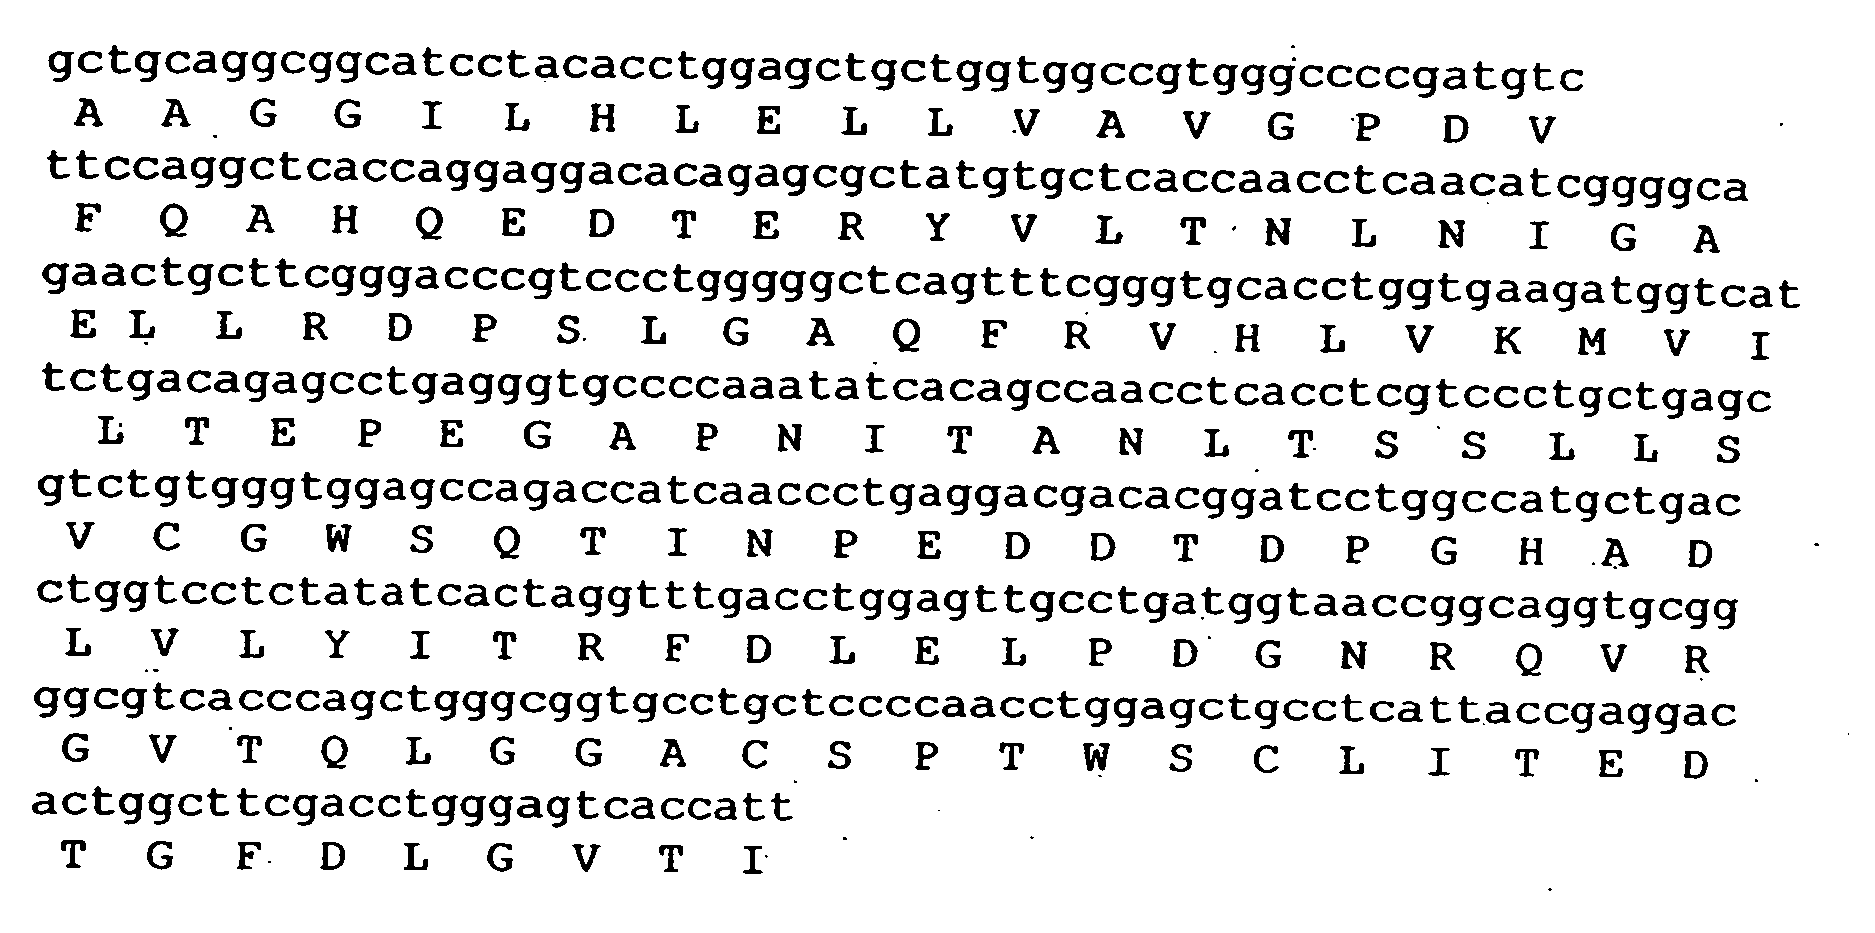 Composition exhibiting a von Willebrand factor (vWF) protease activity comprising a polypeptide chain with the amino acid sequence AAGGILHLELLV